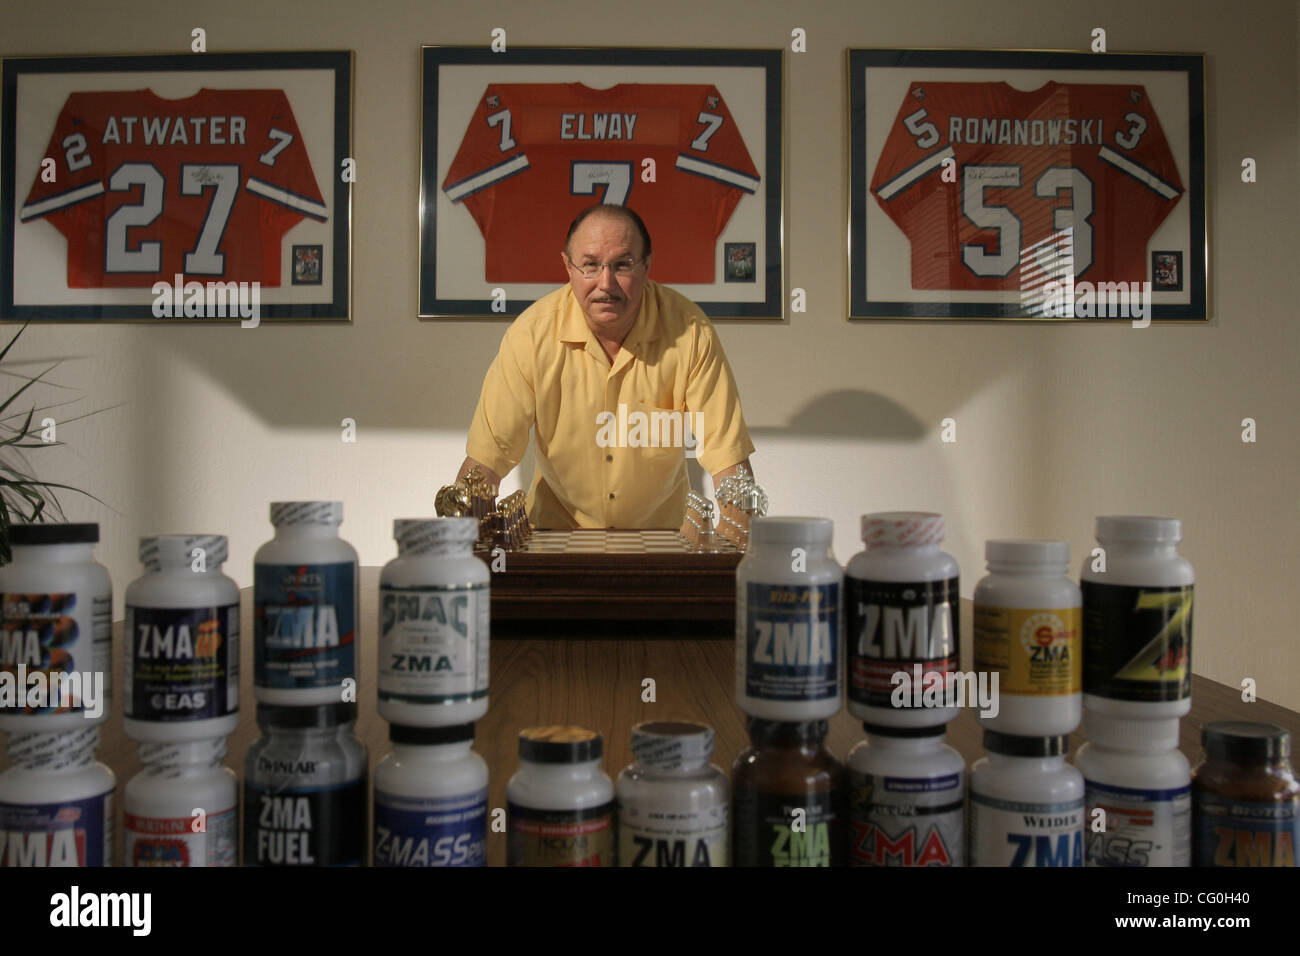 Jun 29, 2007 - Bulingame, California, USA - BALCO founder VICTOR CONTE in an office of his new company. His current line of performance enhancing supplements are featured in the foreground and signed athletic jerseys hang behind. (Credit Image: © Martin Klimek/ZUMA Press) Stock Photo